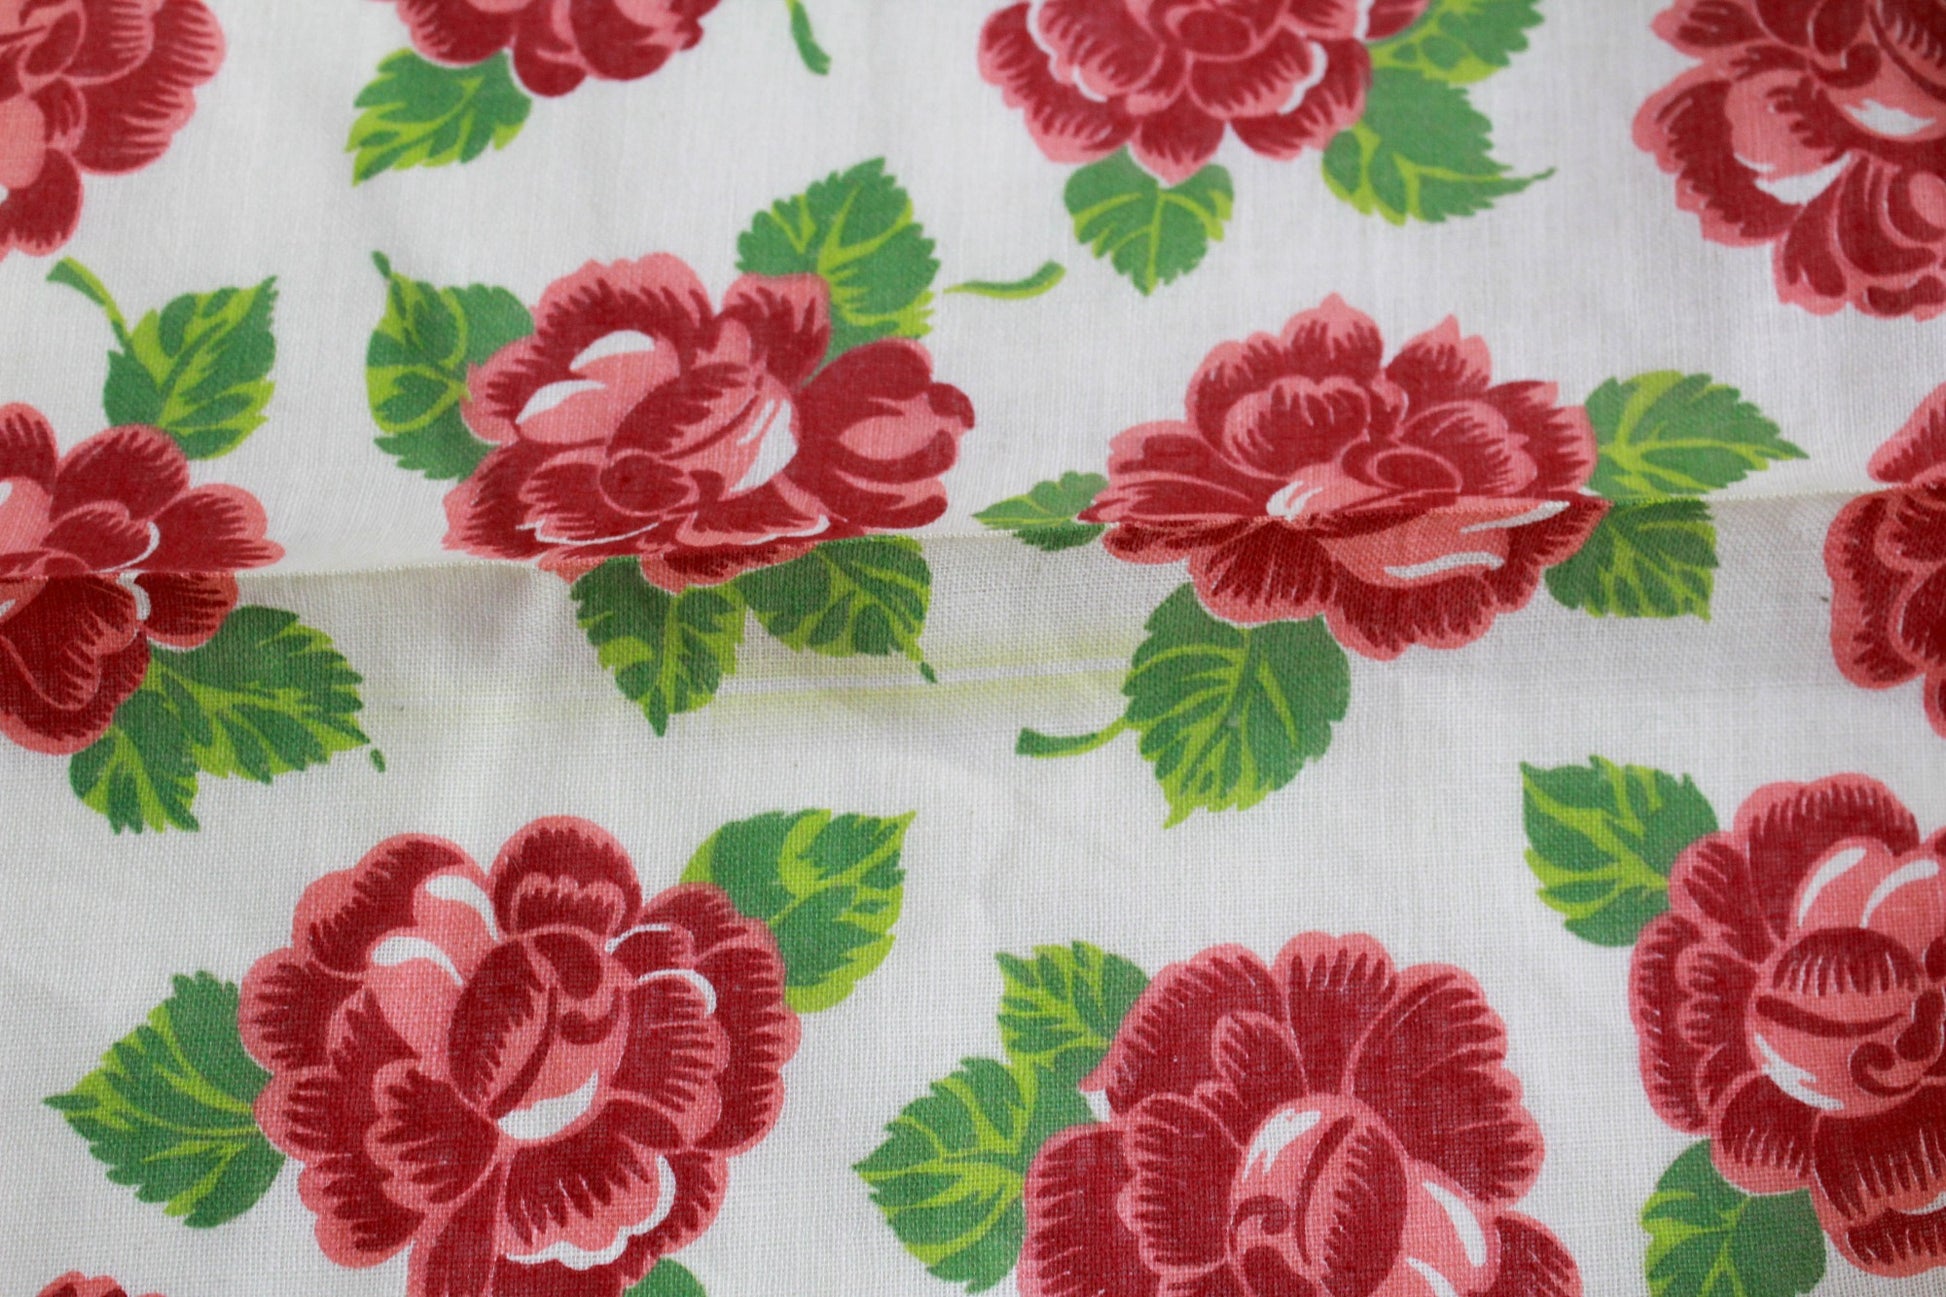 1940s Poppy Print Cotton Fabric, 5 + Yards, Floral Print Sewing